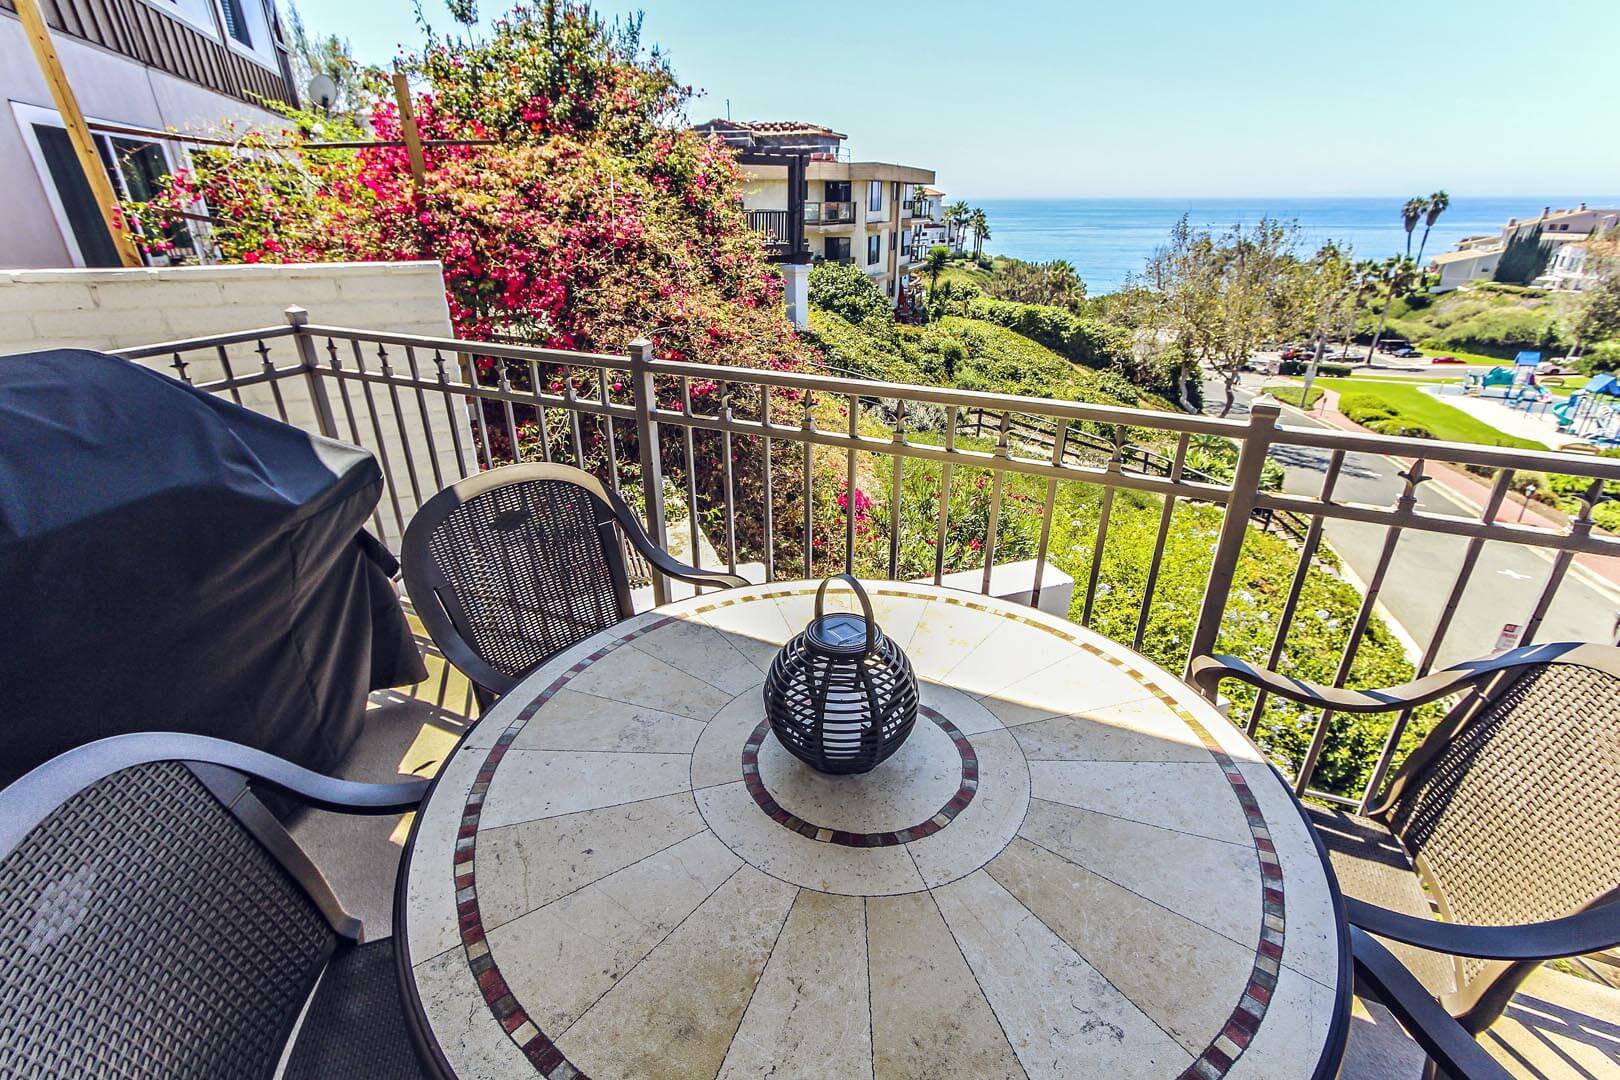 A Balcony View at VRI's Four Seasons Pacifica in San Clemente, California.